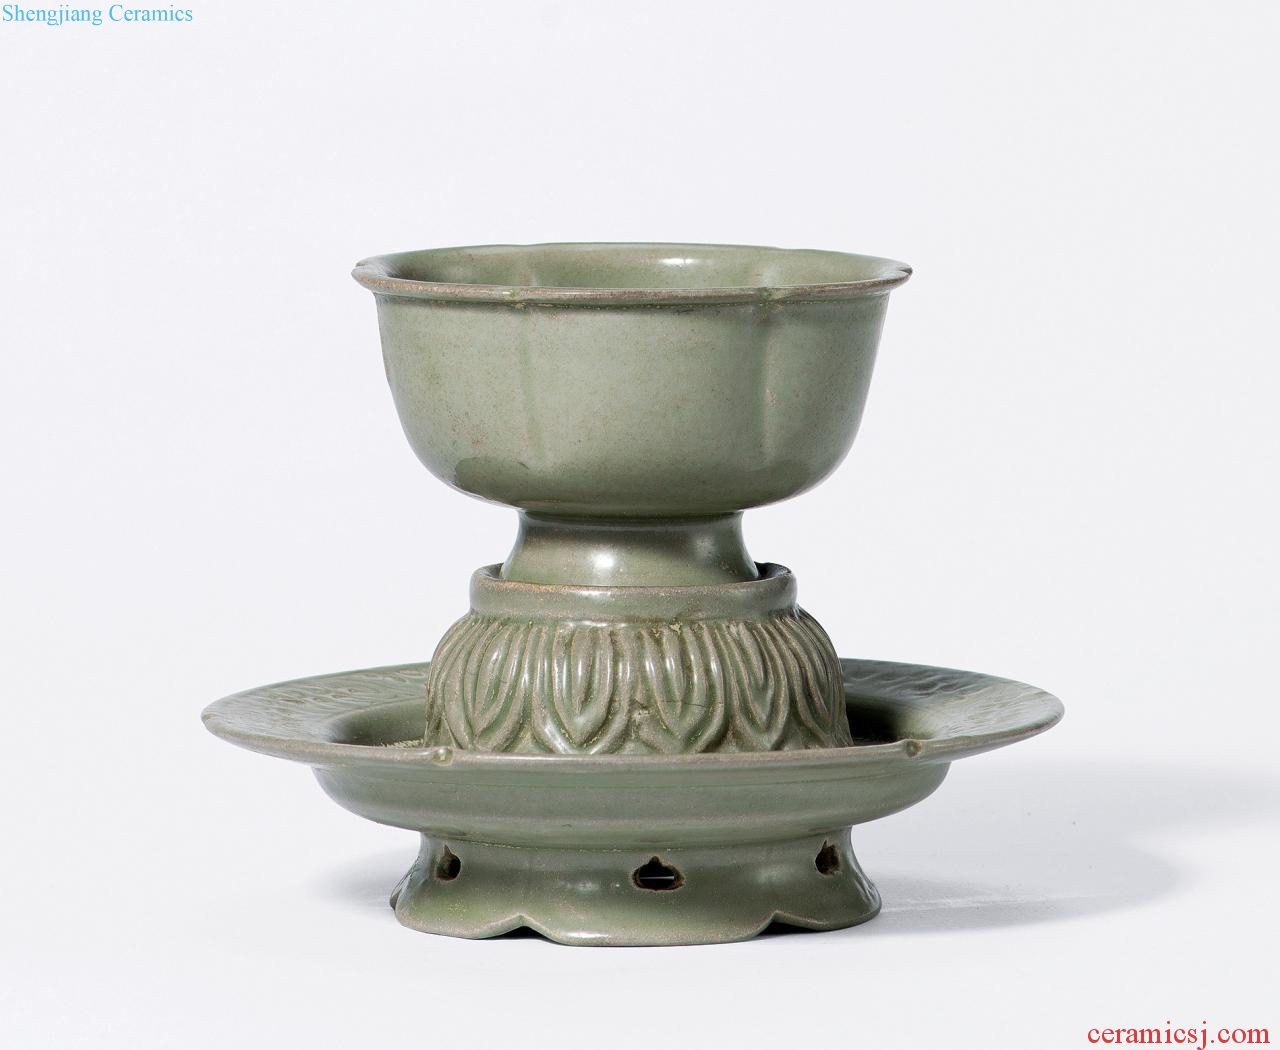 Northern song dynasty (960-1127), the kiln green glaze cut flower shape table lamp that (a)